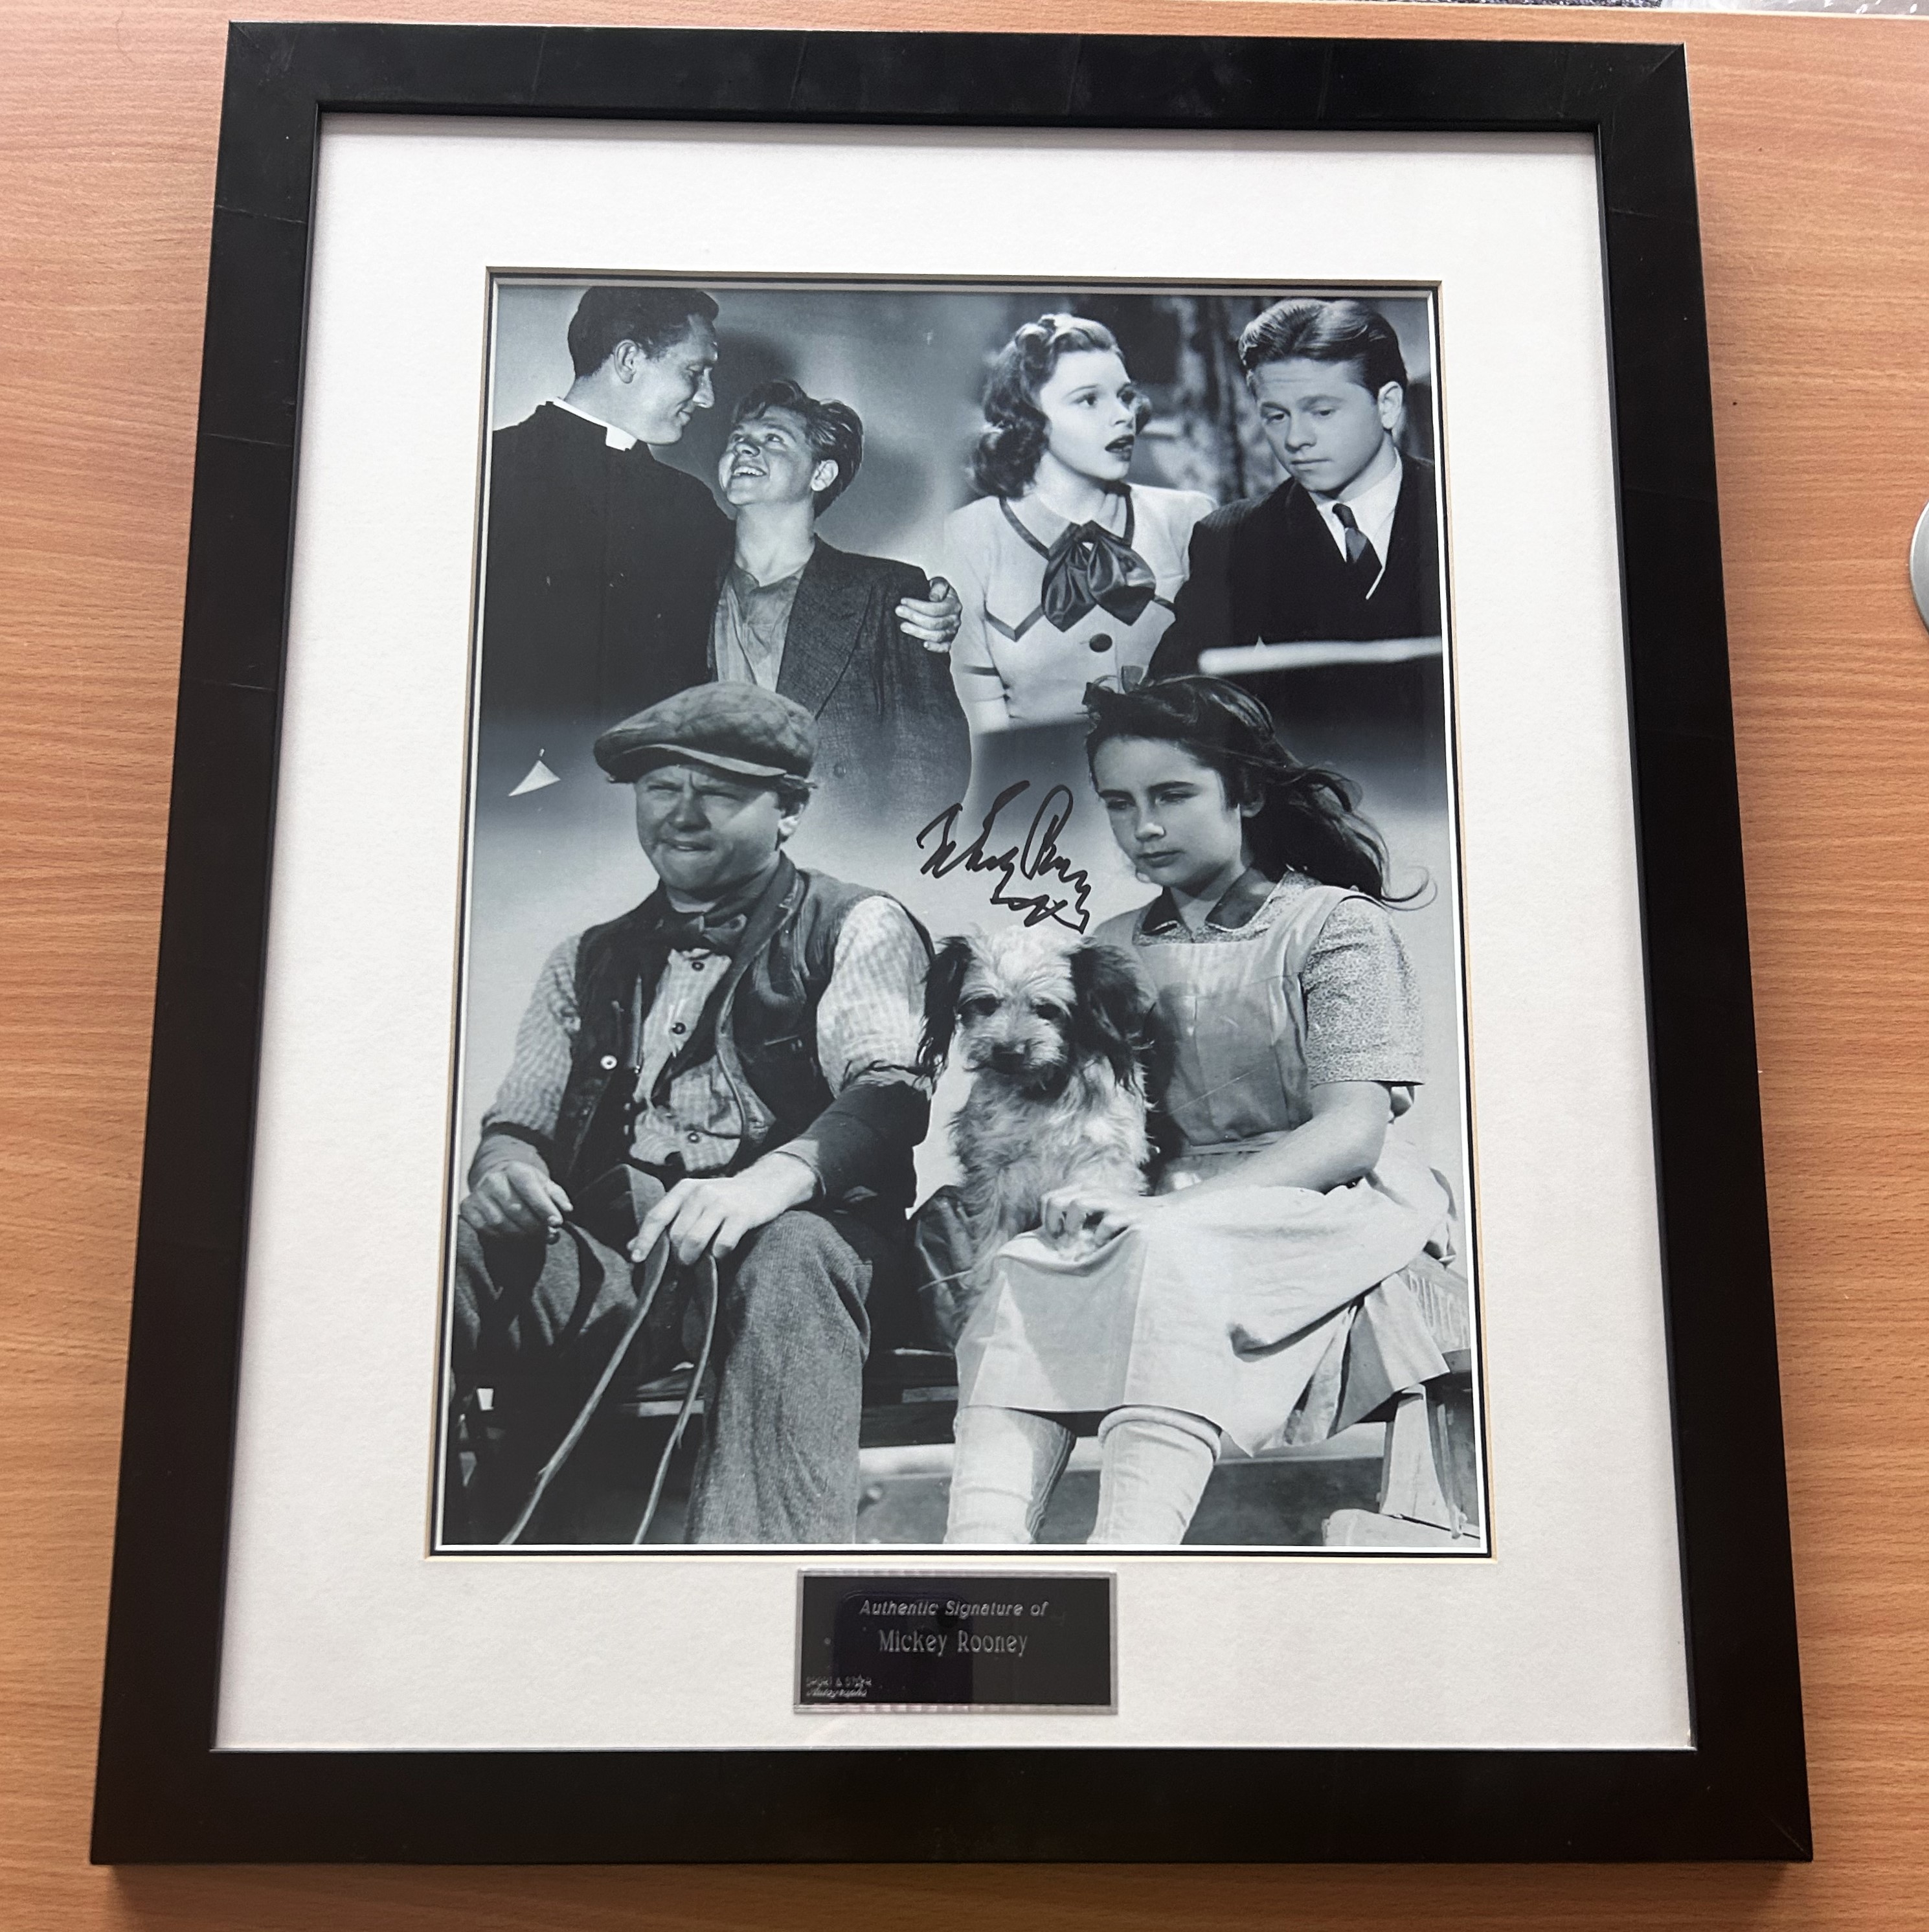 Mickey Rooney signed mounted and framed The Wizard of Oz black and white photo. Measures 22"x18"